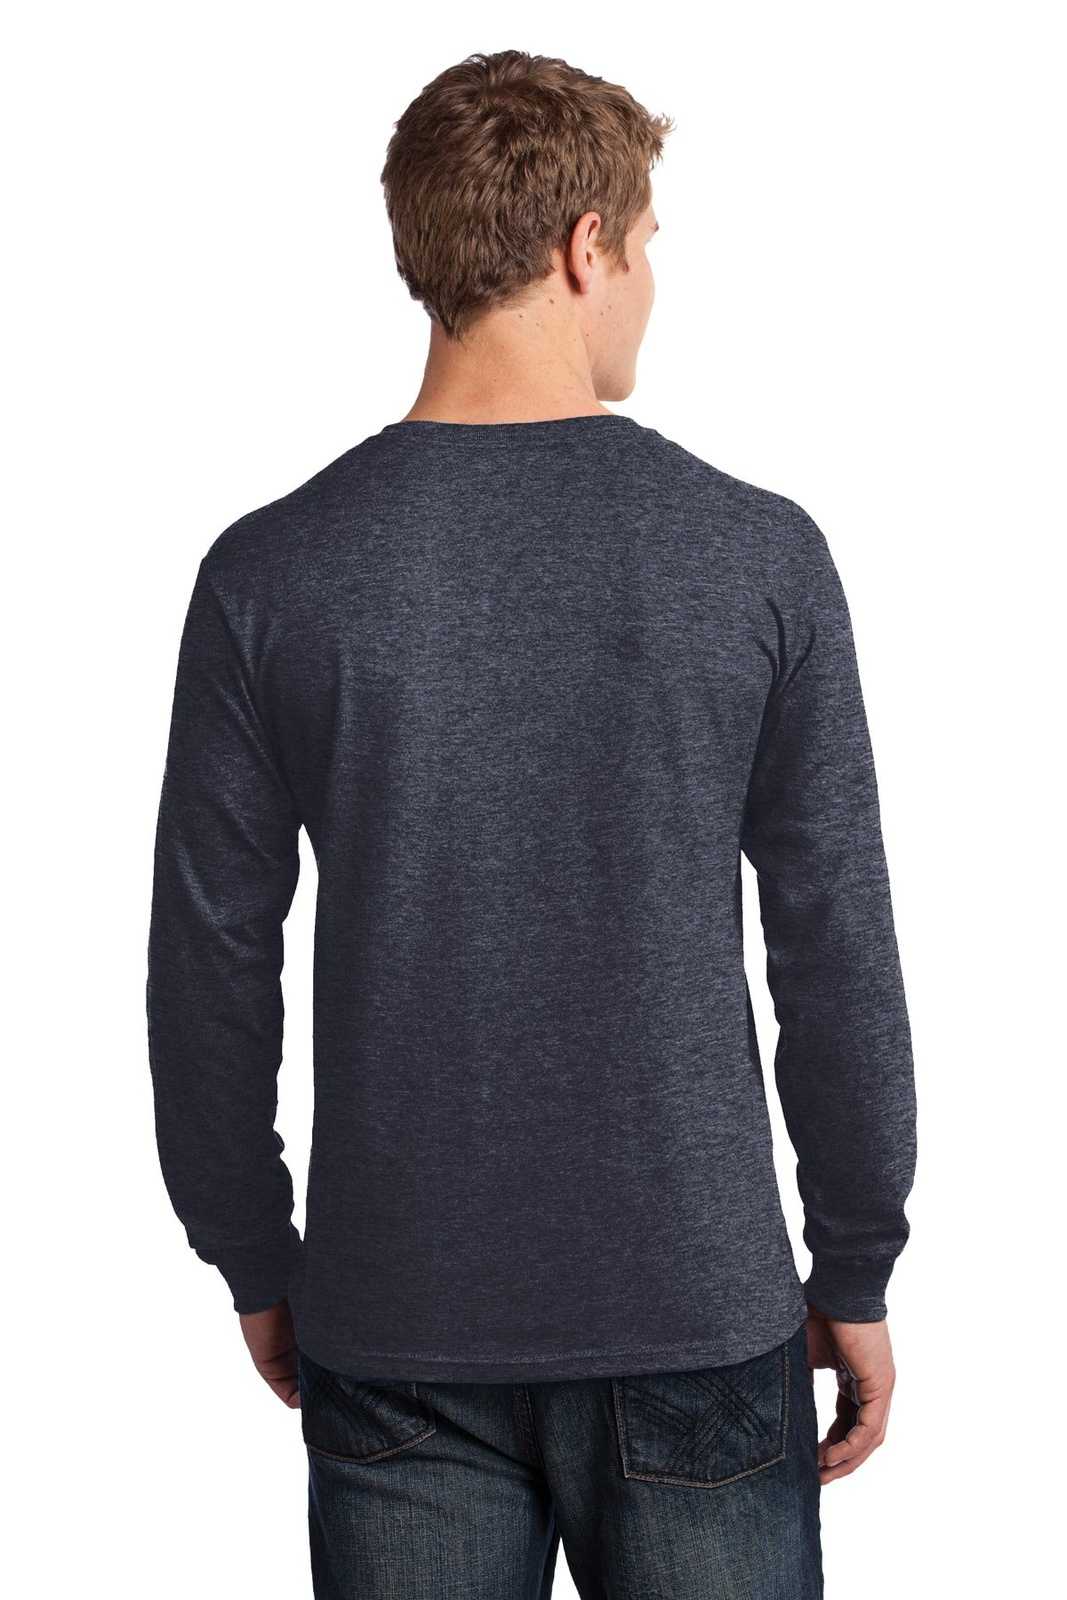 Port &amp; Company PC54LS Long Sleeve Core Cotton Tee - Heather Navy - HIT a Double - 2